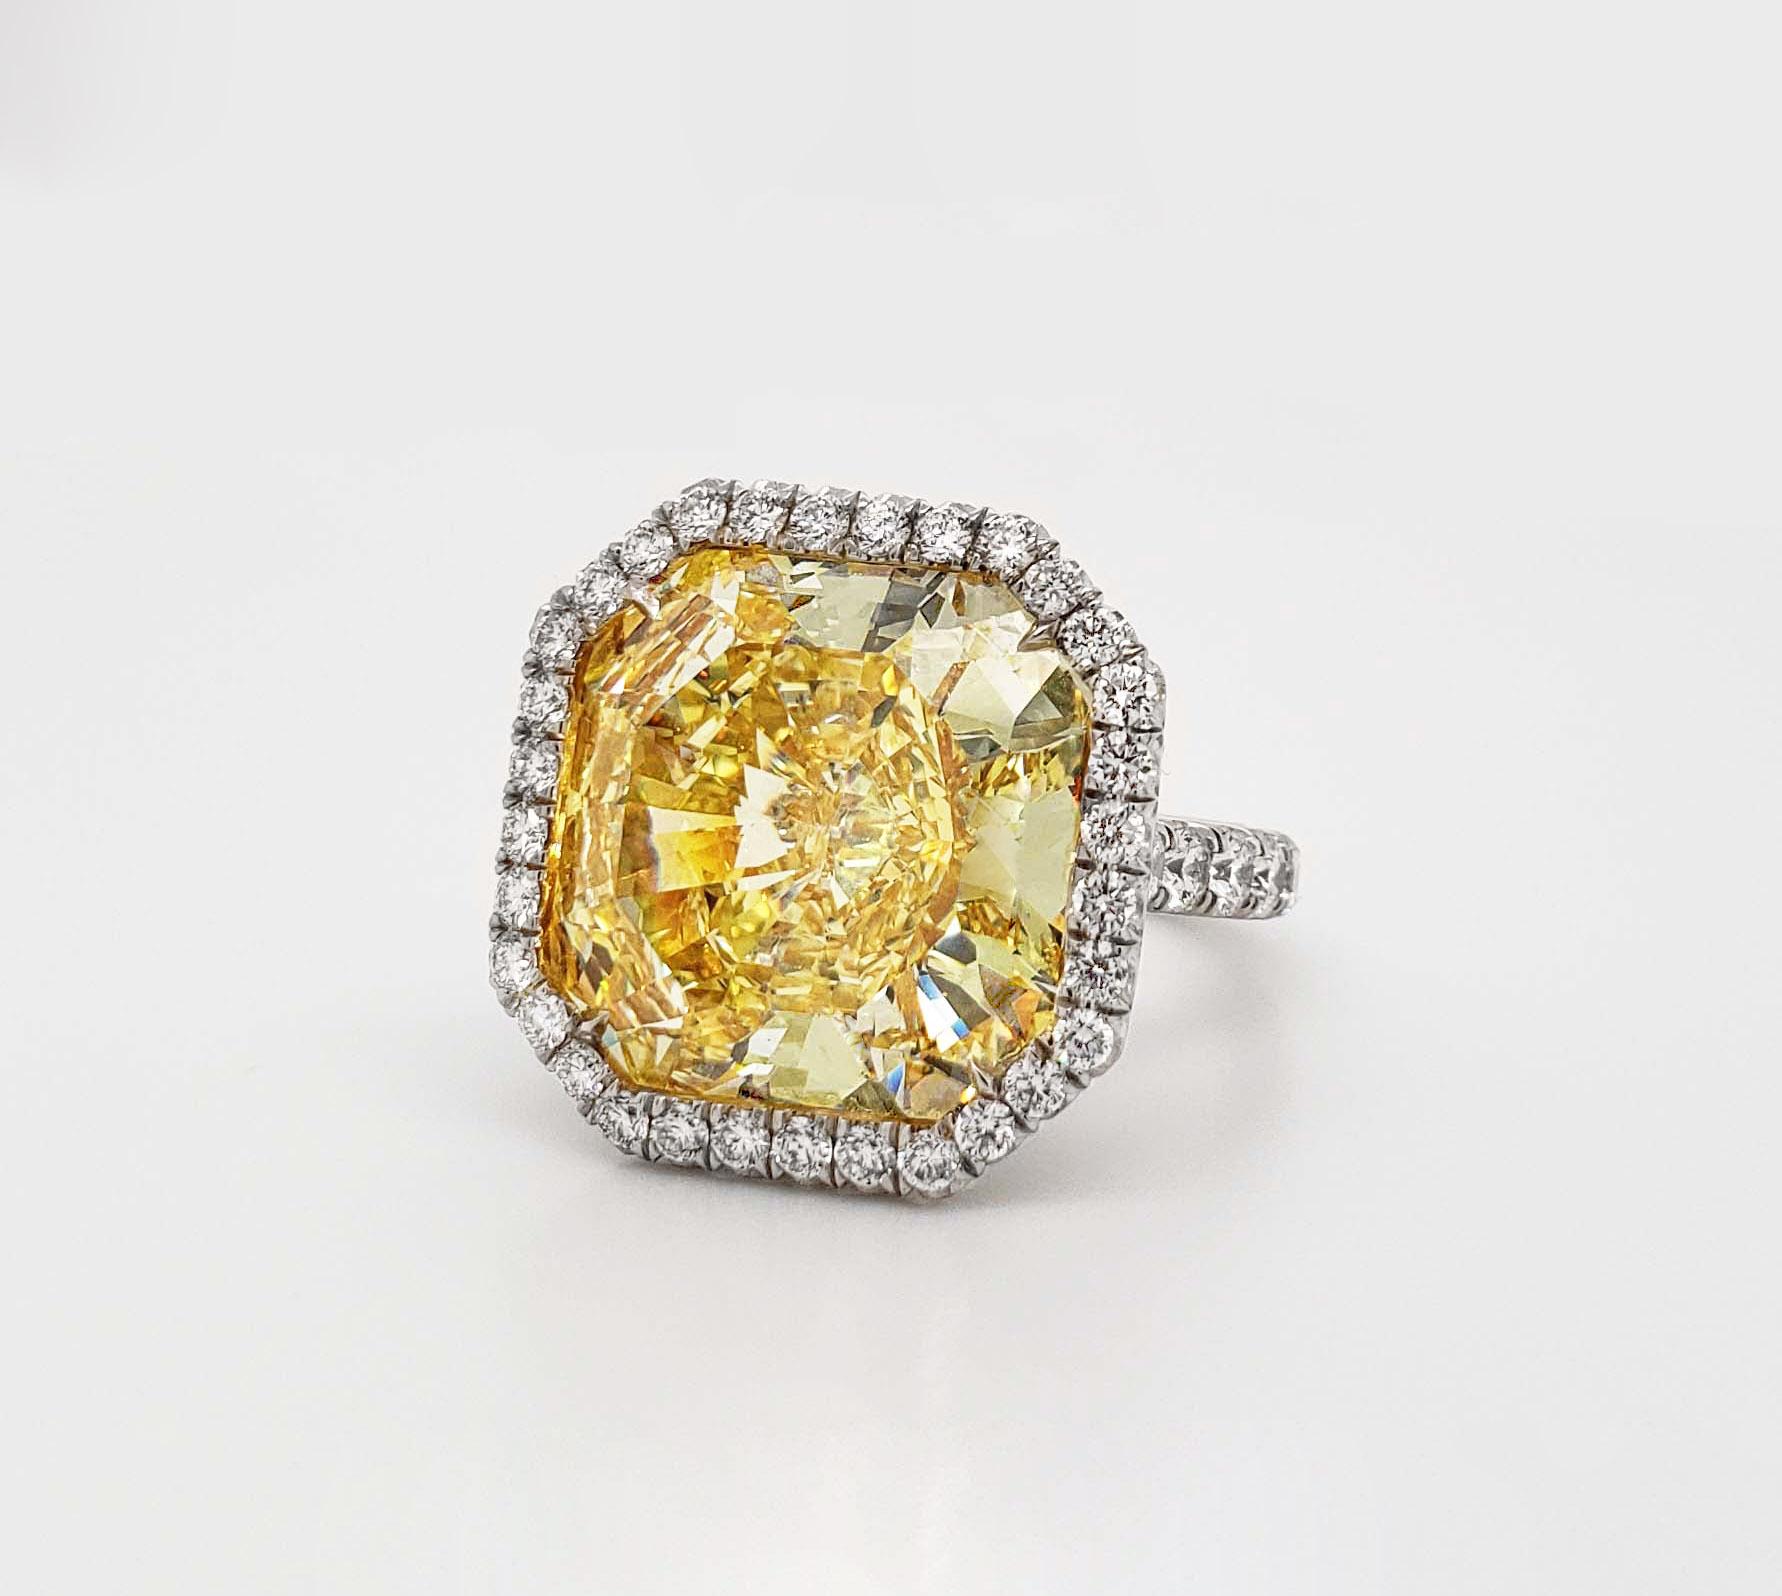 Scarselli 15 Carat Fancy Intense Yellow Diamond Ring Internally Flawless GIA In New Condition For Sale In New York, NY